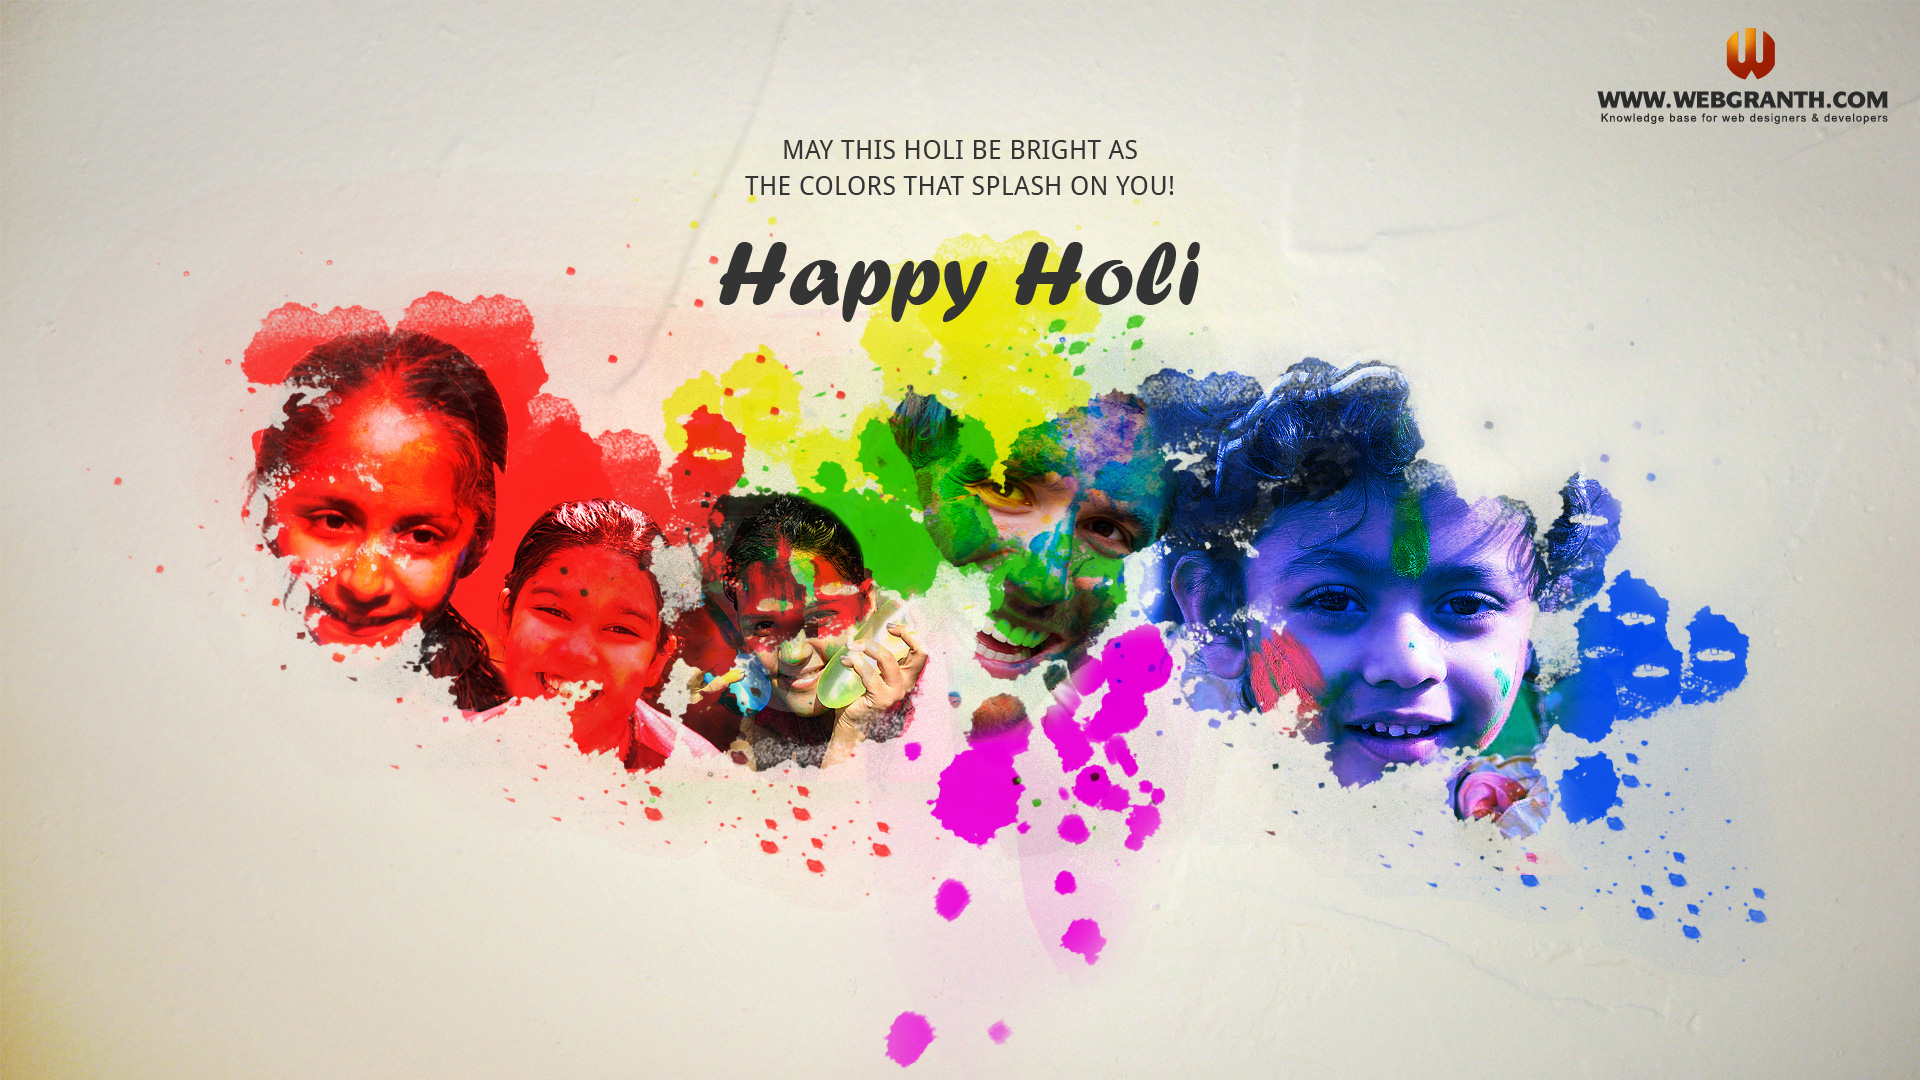 The Concept Behind Design Of This HD Holi Festival Wallpaper